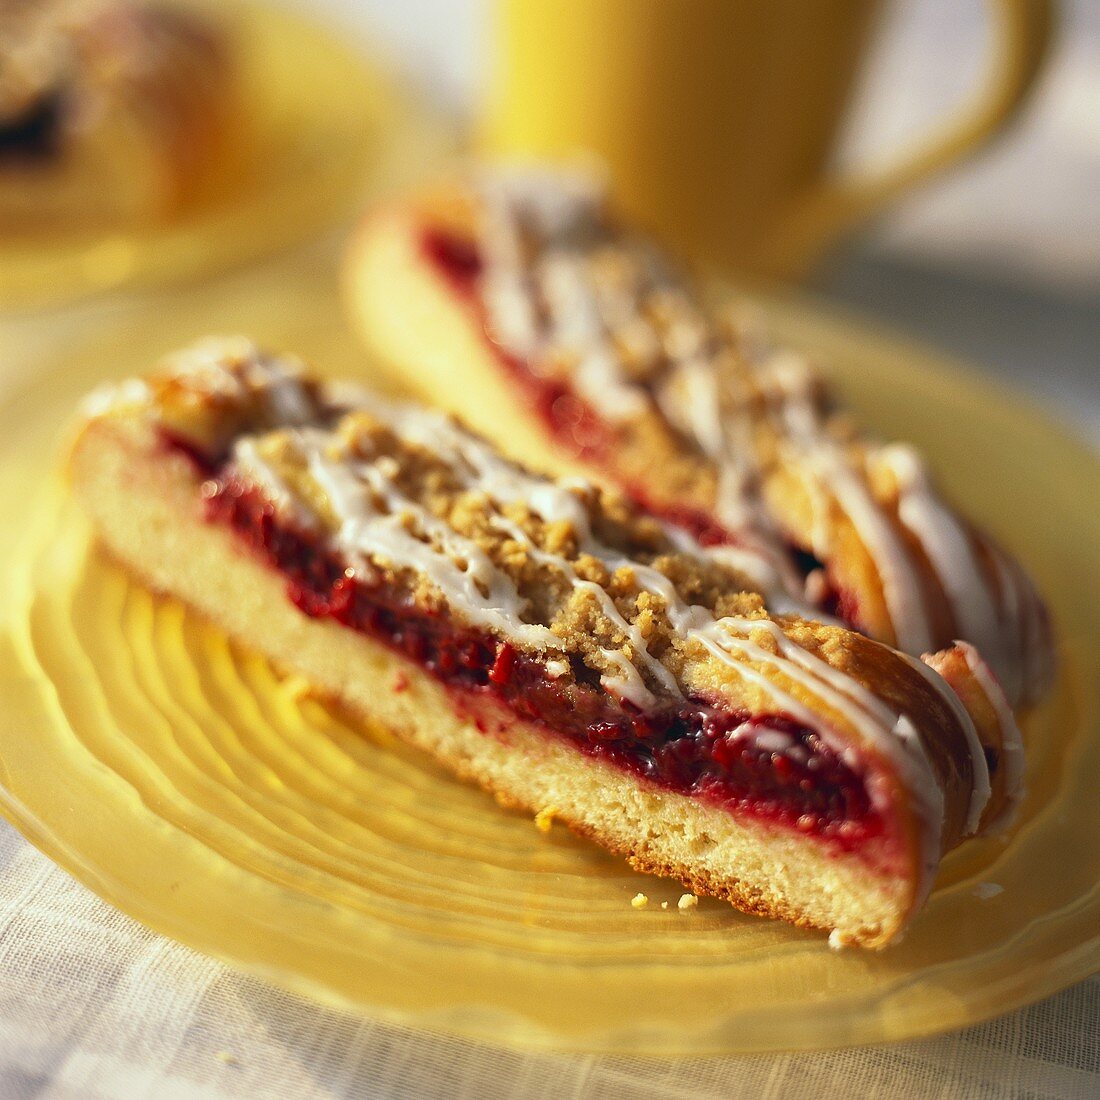 Slices of Coffee Cake with Berry Filling